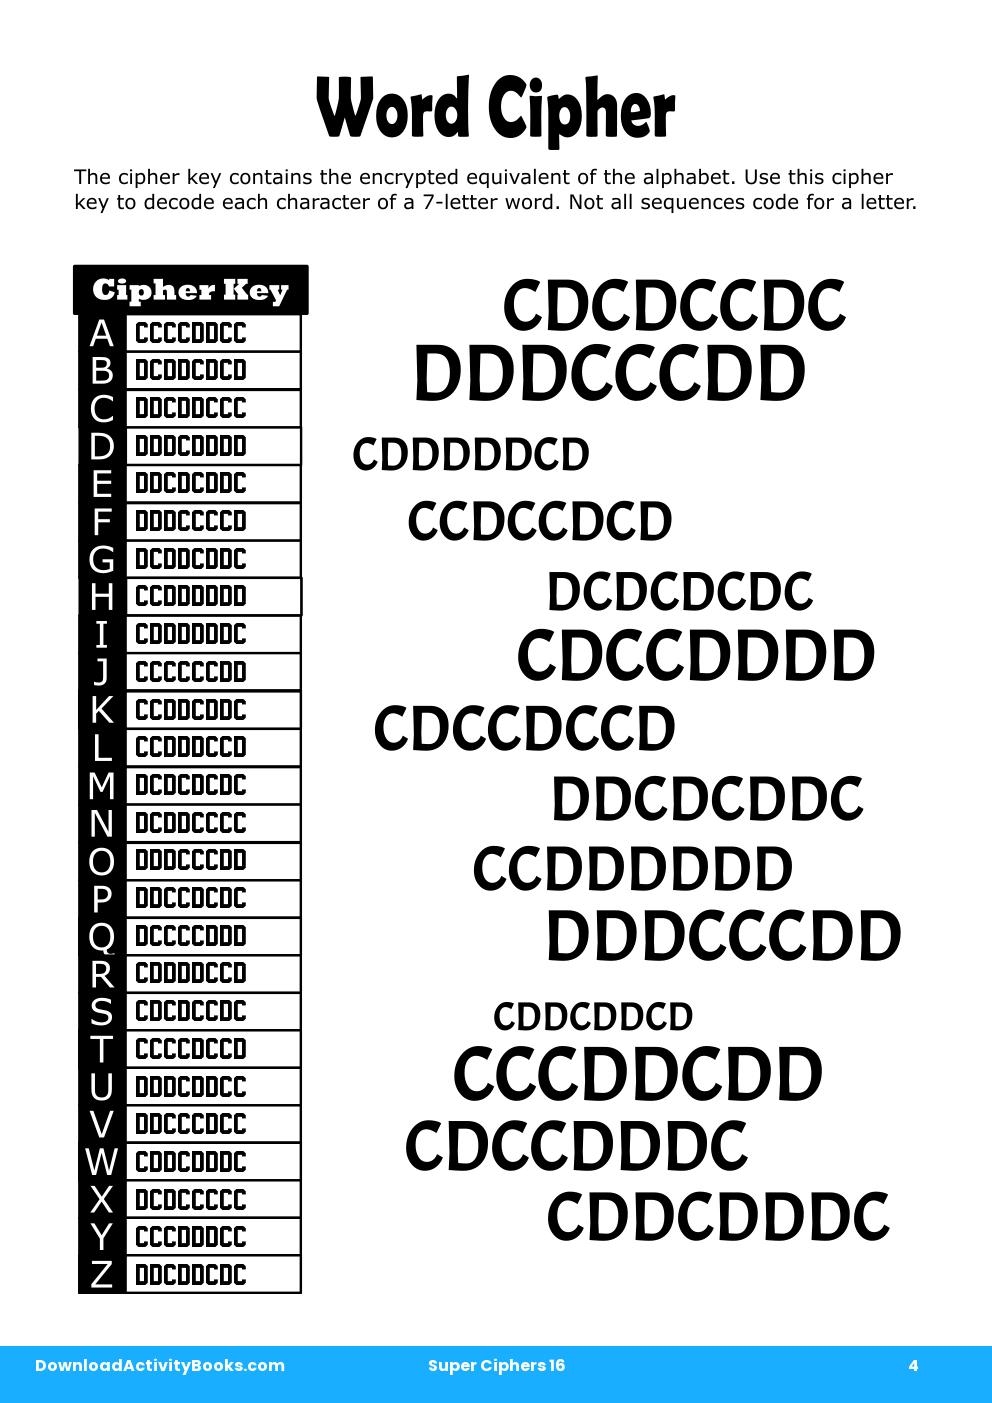 Word Cipher in Super Ciphers 16